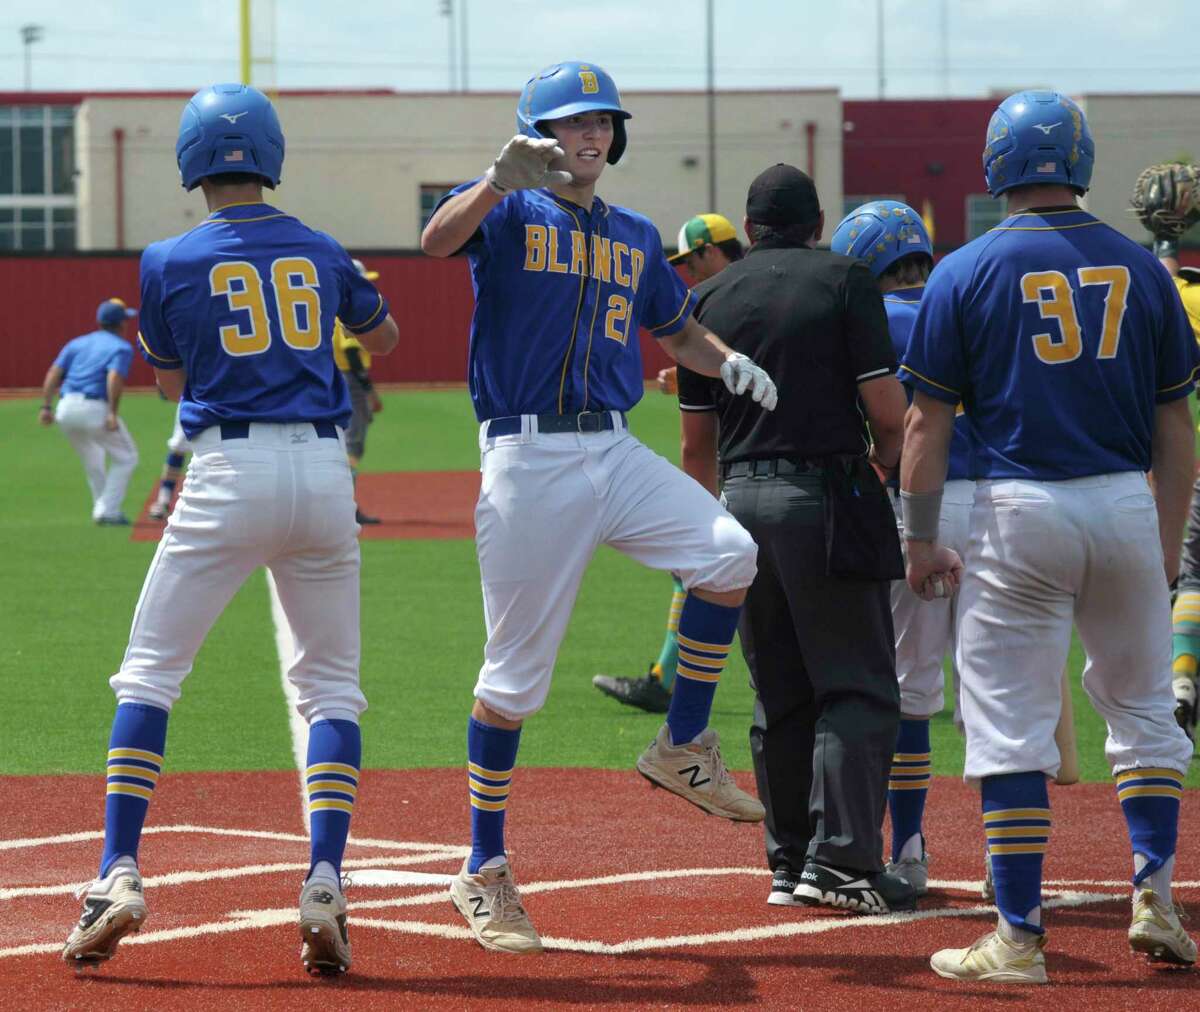 Blanco's Justin Wardlow (21) celebrates with teammates after scoring on a 7th-inning three-RBI triple by teammate Baylor Smith during Game 2 of the 3A regional final playoff series against Bishop in Jourdanton on Saturday, June 1, 2019. Blanco won and advances to the state tournament.